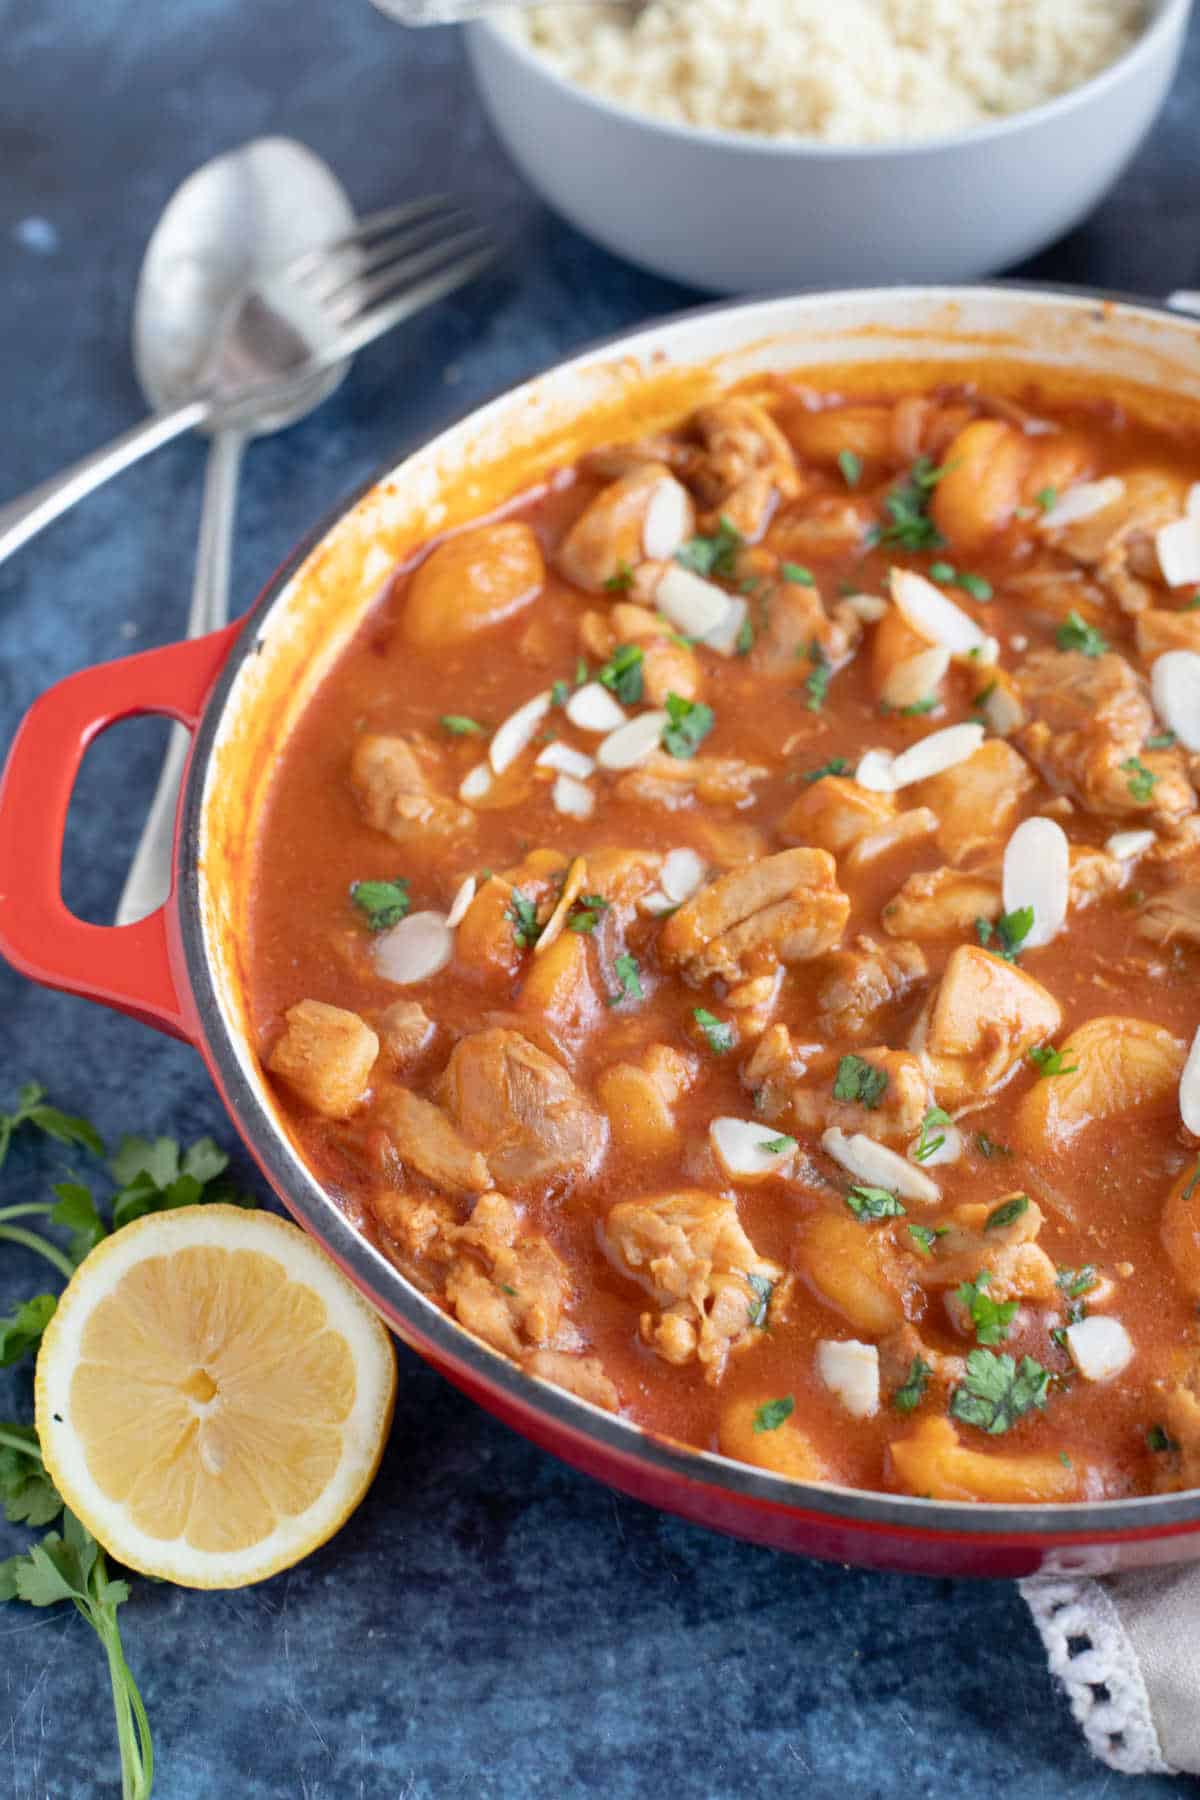 Chicken and apricot tagine in a red shallow casserole.